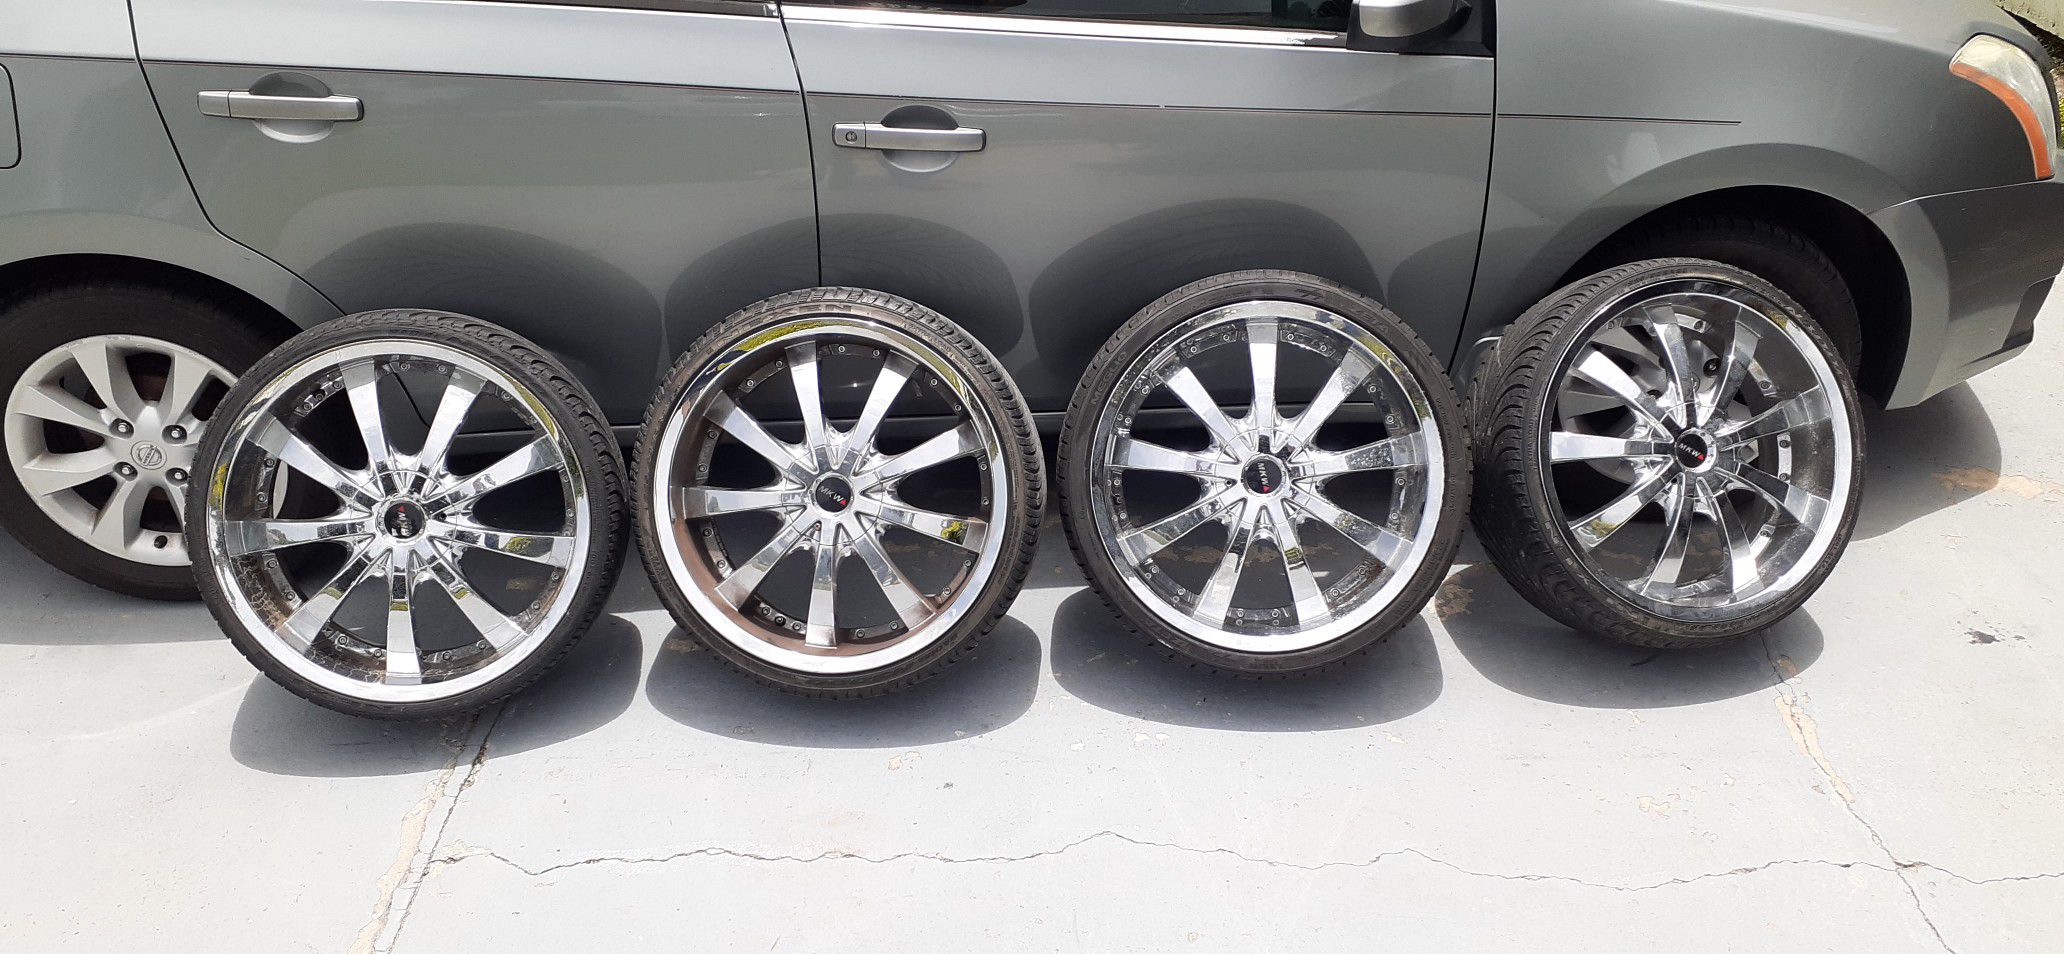 Tires size 255 _ 35 R 20 and rims 4 holes universal